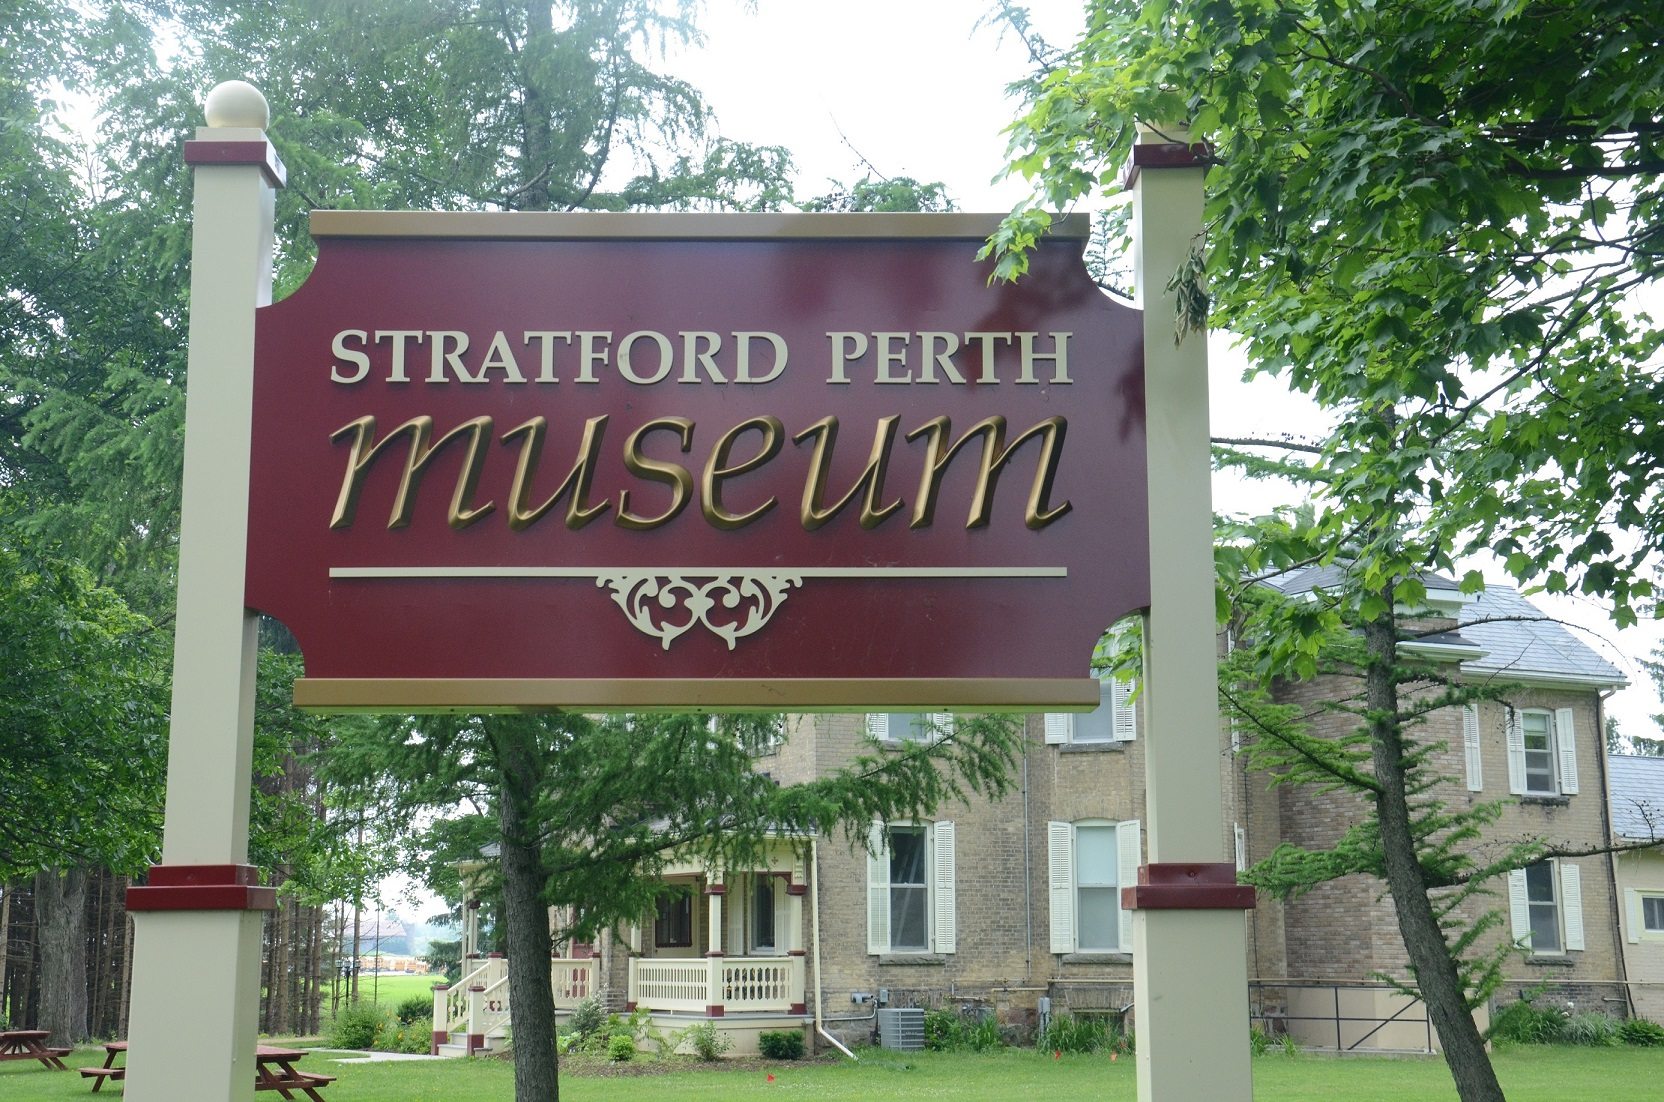 TripAdvisor gives Stratford Perth Museum Certificate of Excellence